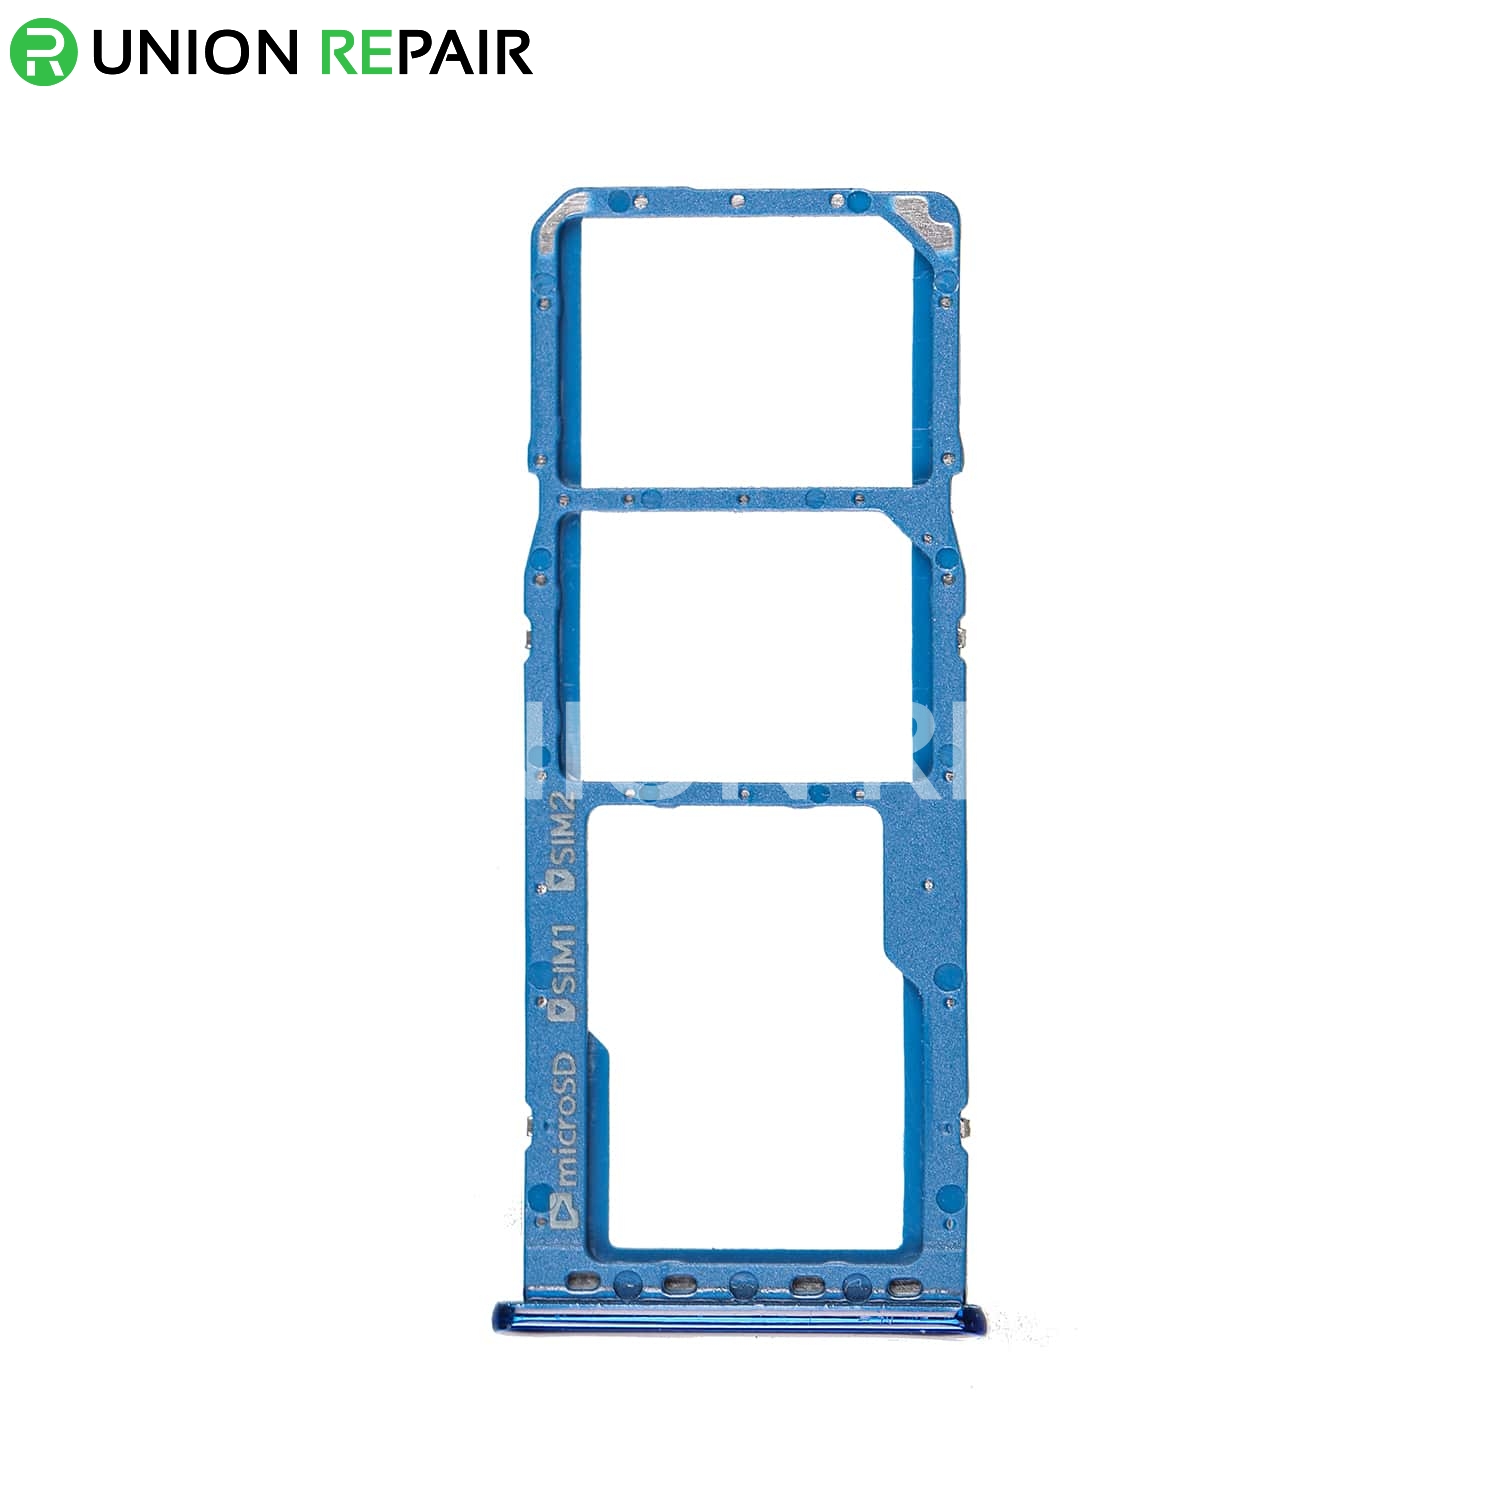 Replacement for Samsung Galaxy A7 (2018) SM-750 SIM Card Tray - Blue